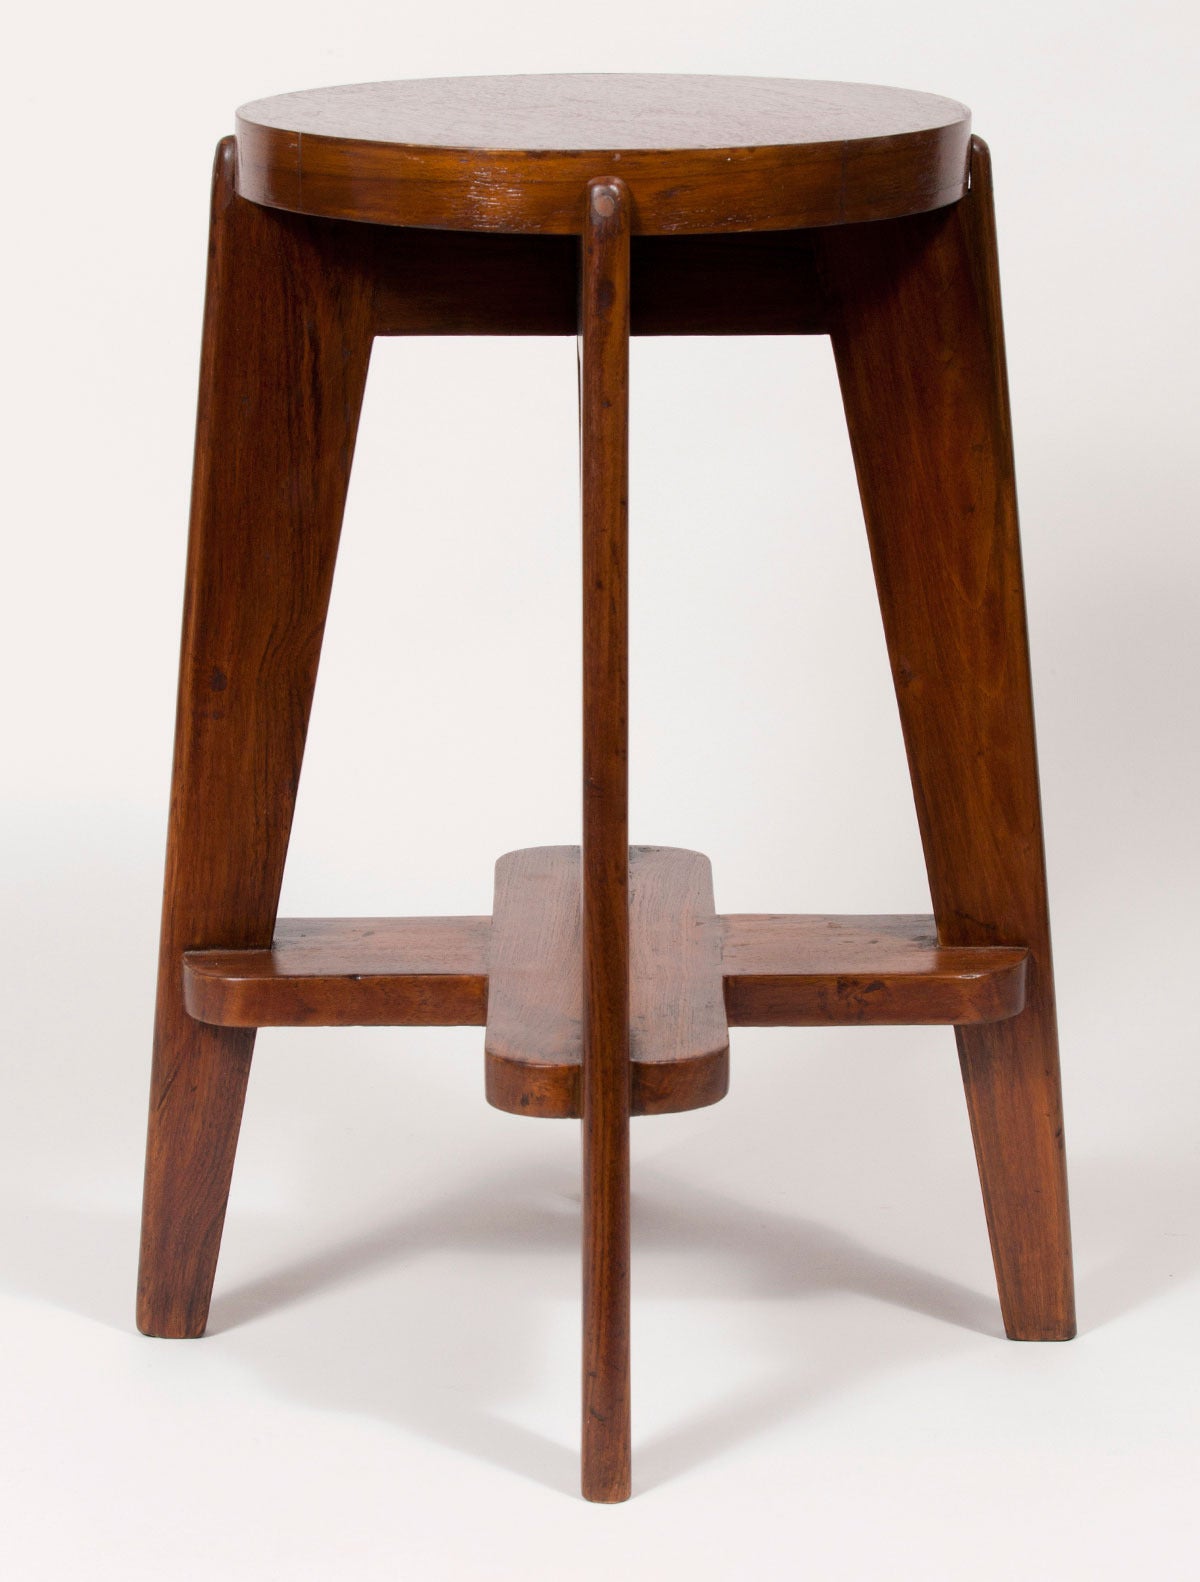 Solid teak stool by the Swiss architect Pierre Jeanneret. From the Modernist city Chandigarh, India which he designed with his cousin Le Corbusier. One available.